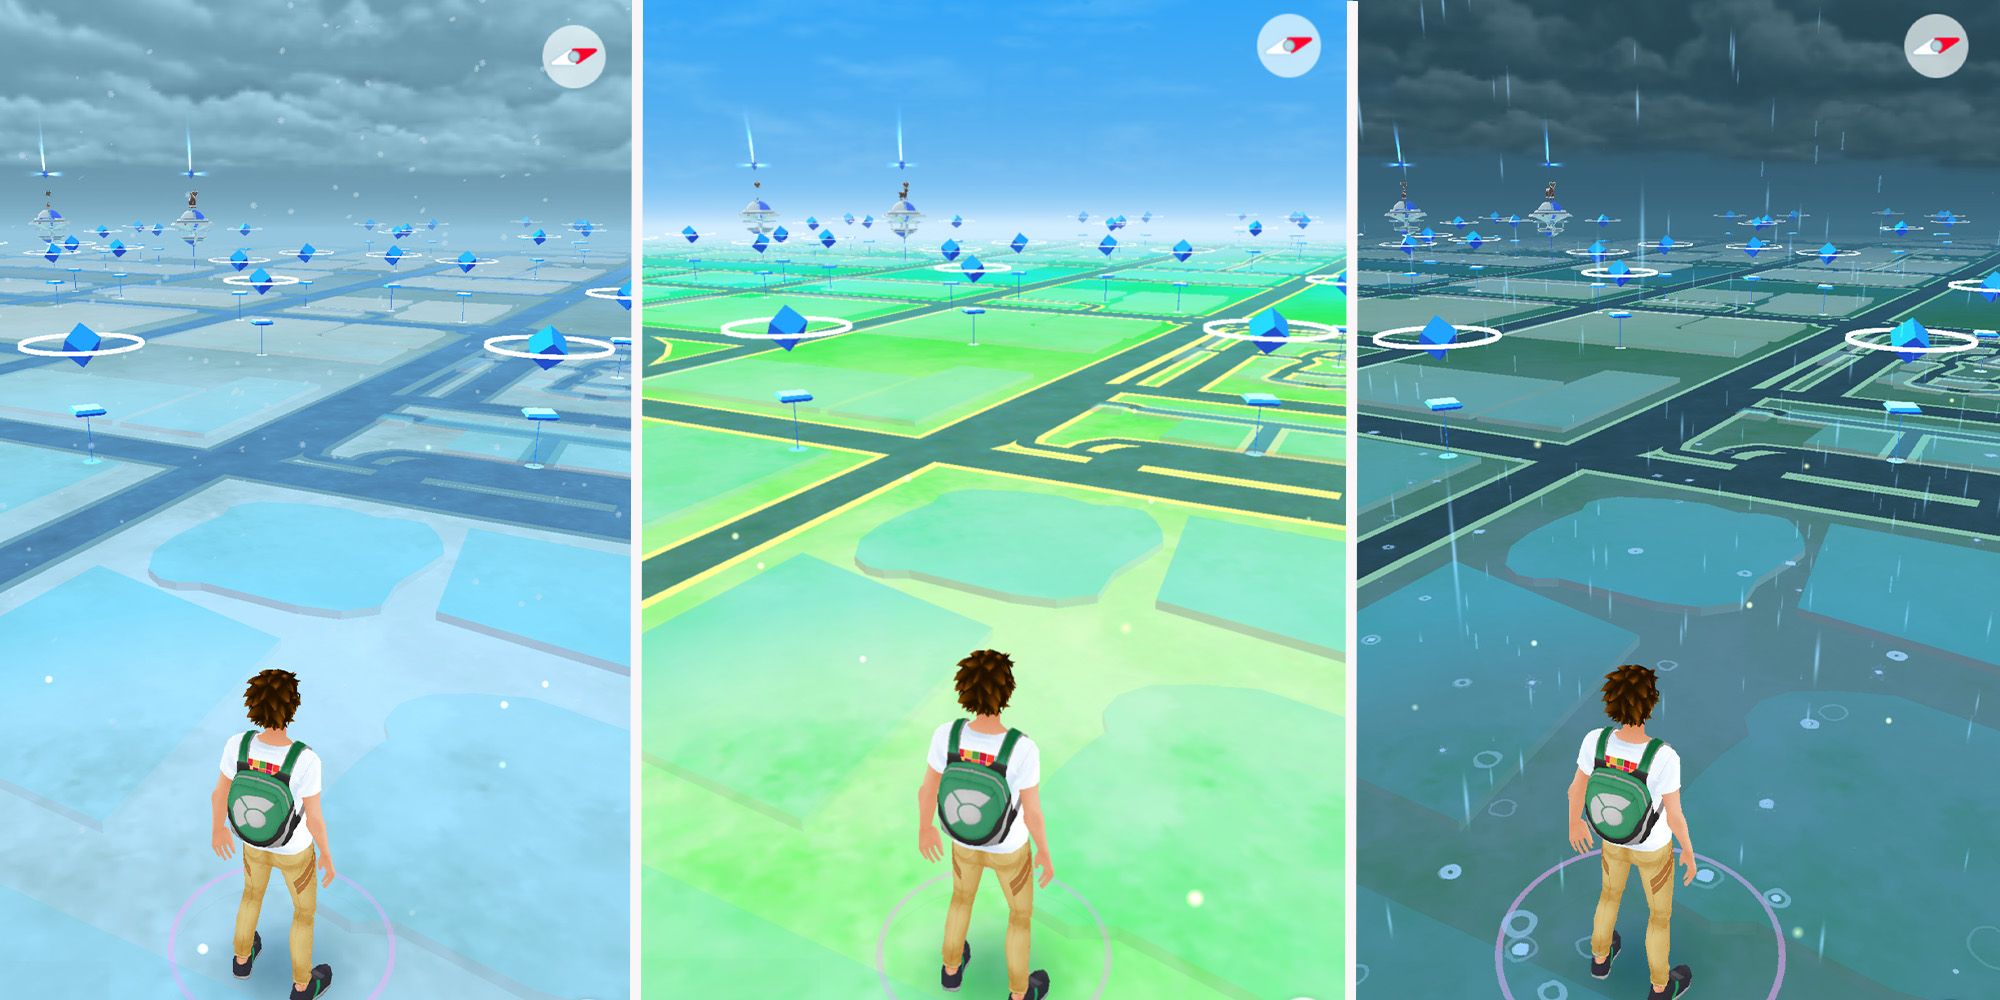 Three types of Weather in the Pokemon Go Overworld, Sunny, Rainy, and Snowy